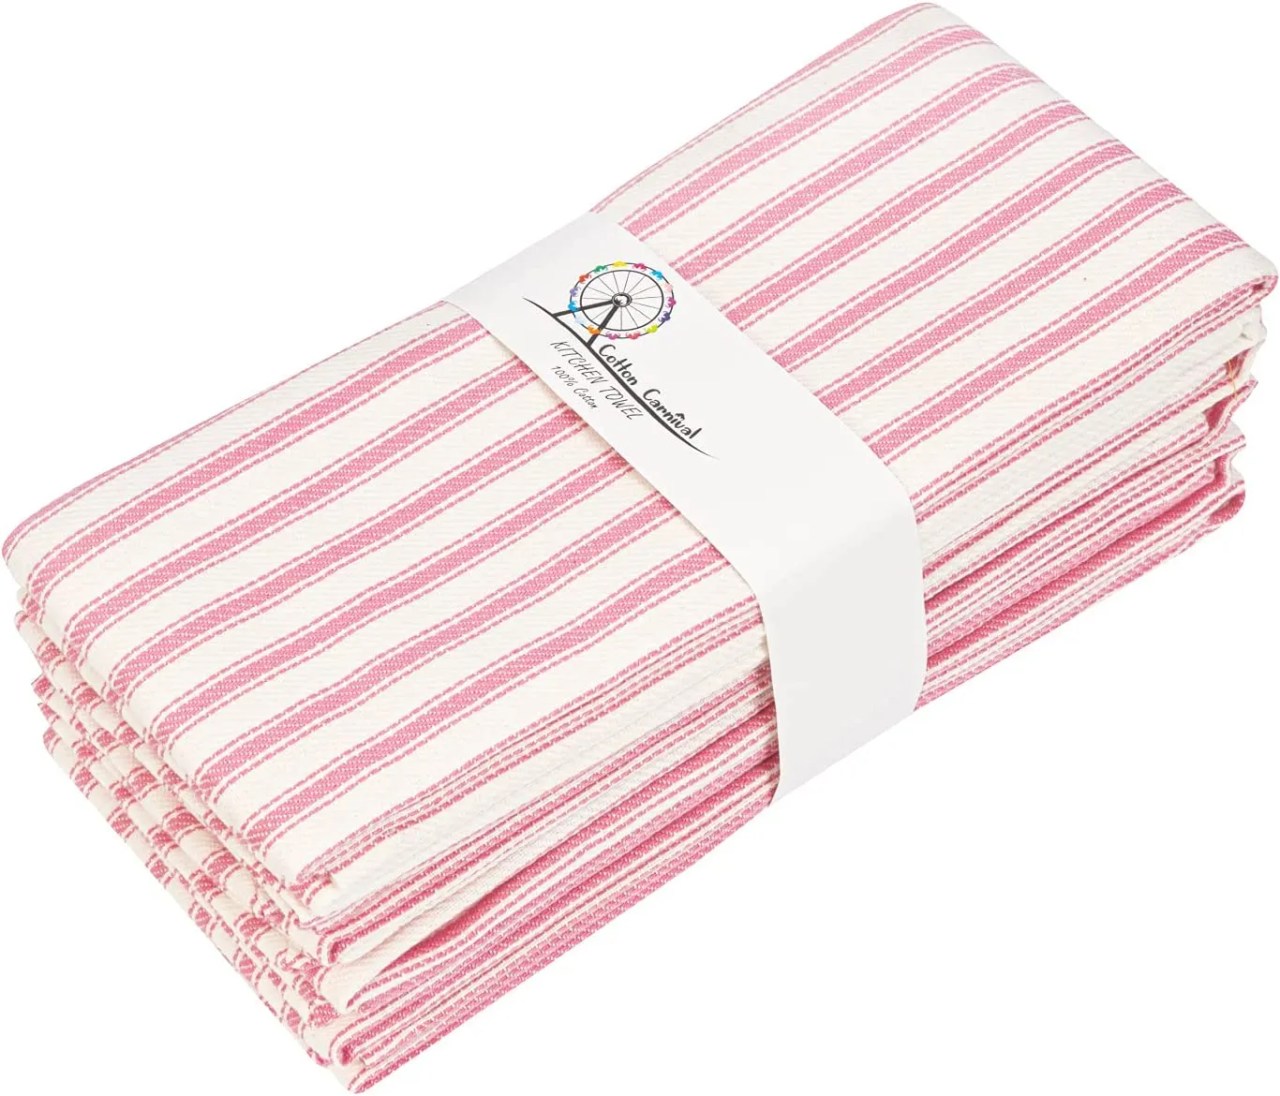 pink and white striped tea towels